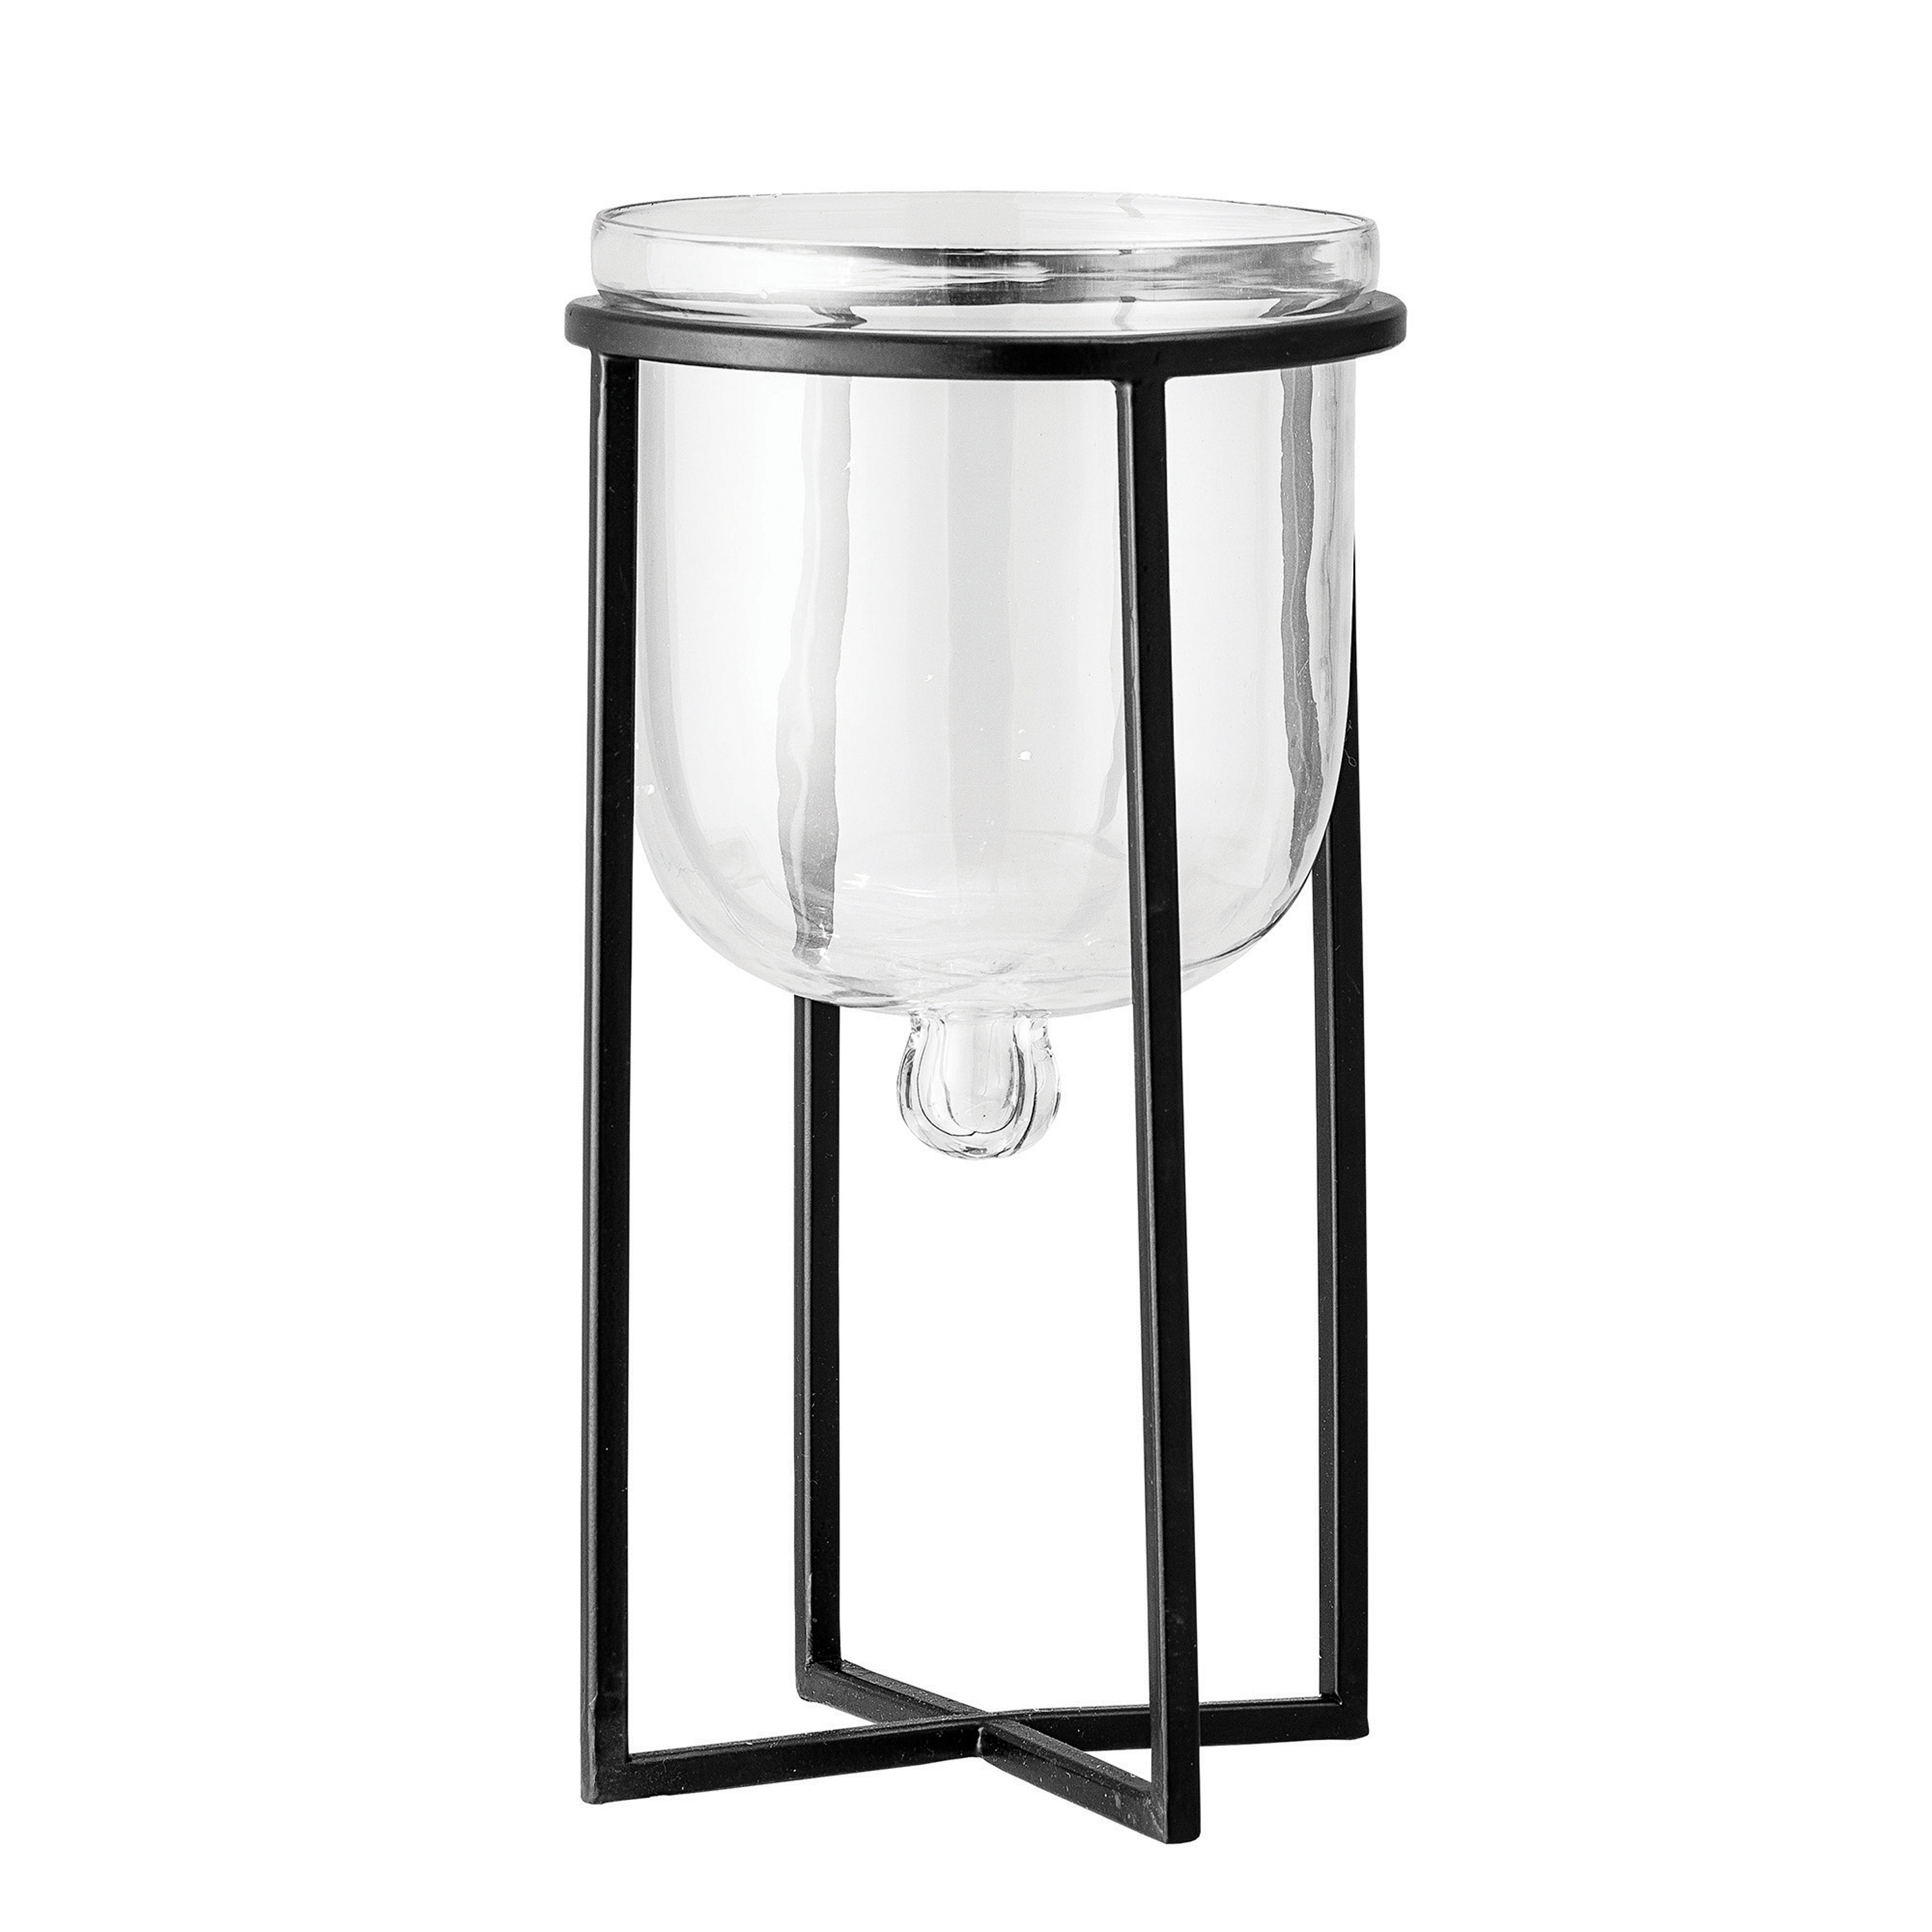 Glass Planter with Black Metal Stand, Set of 2 Pieces - Image 0